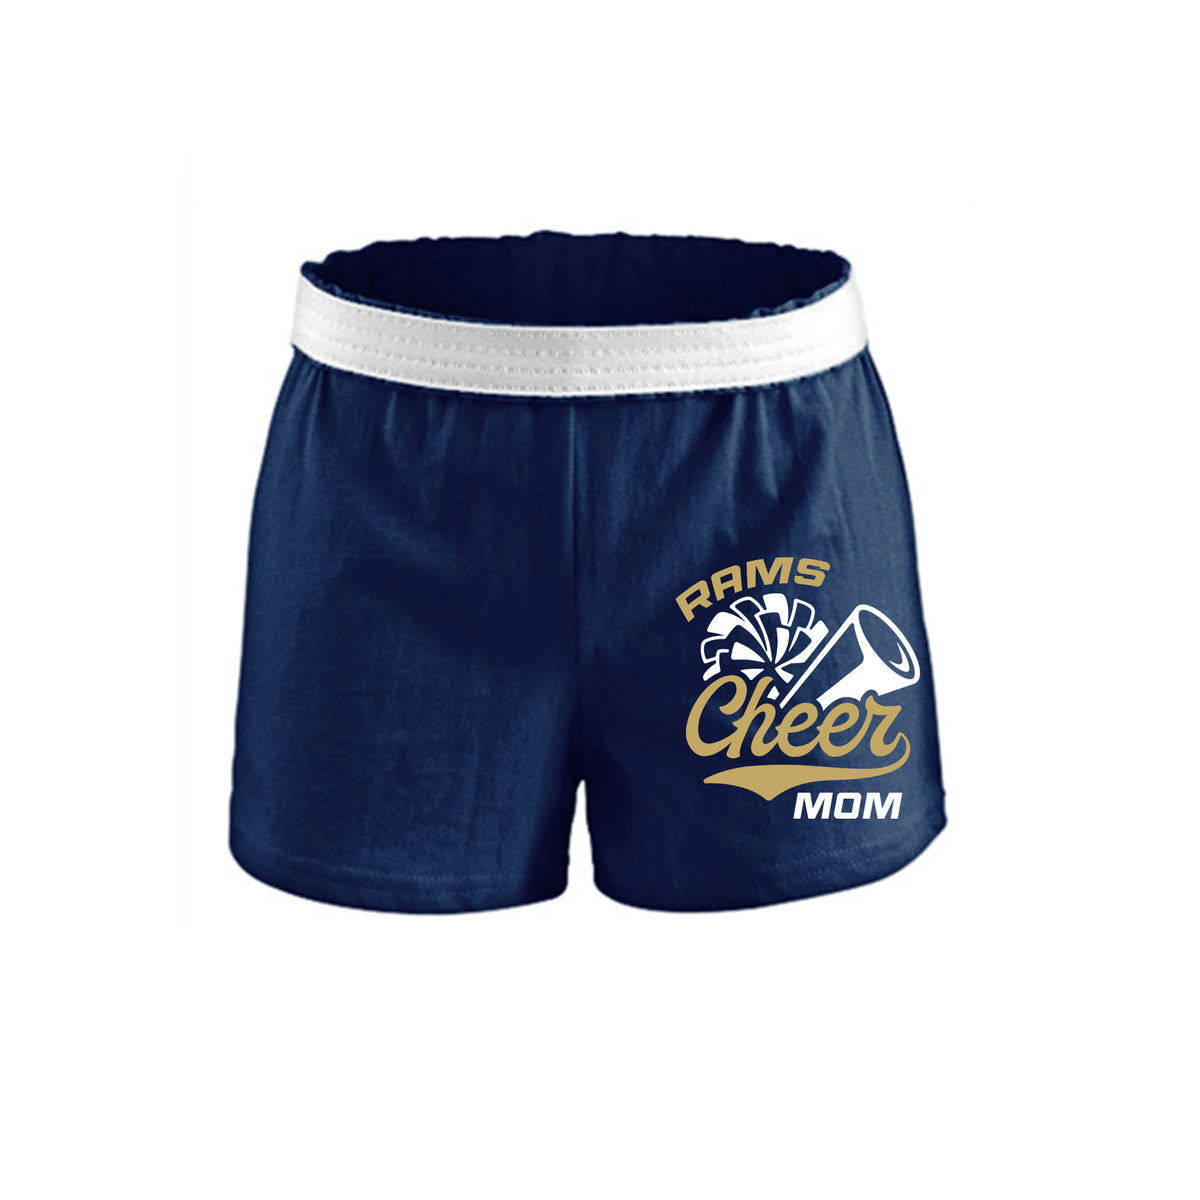 Sussex Middle Cheer girls Shorts Design 1